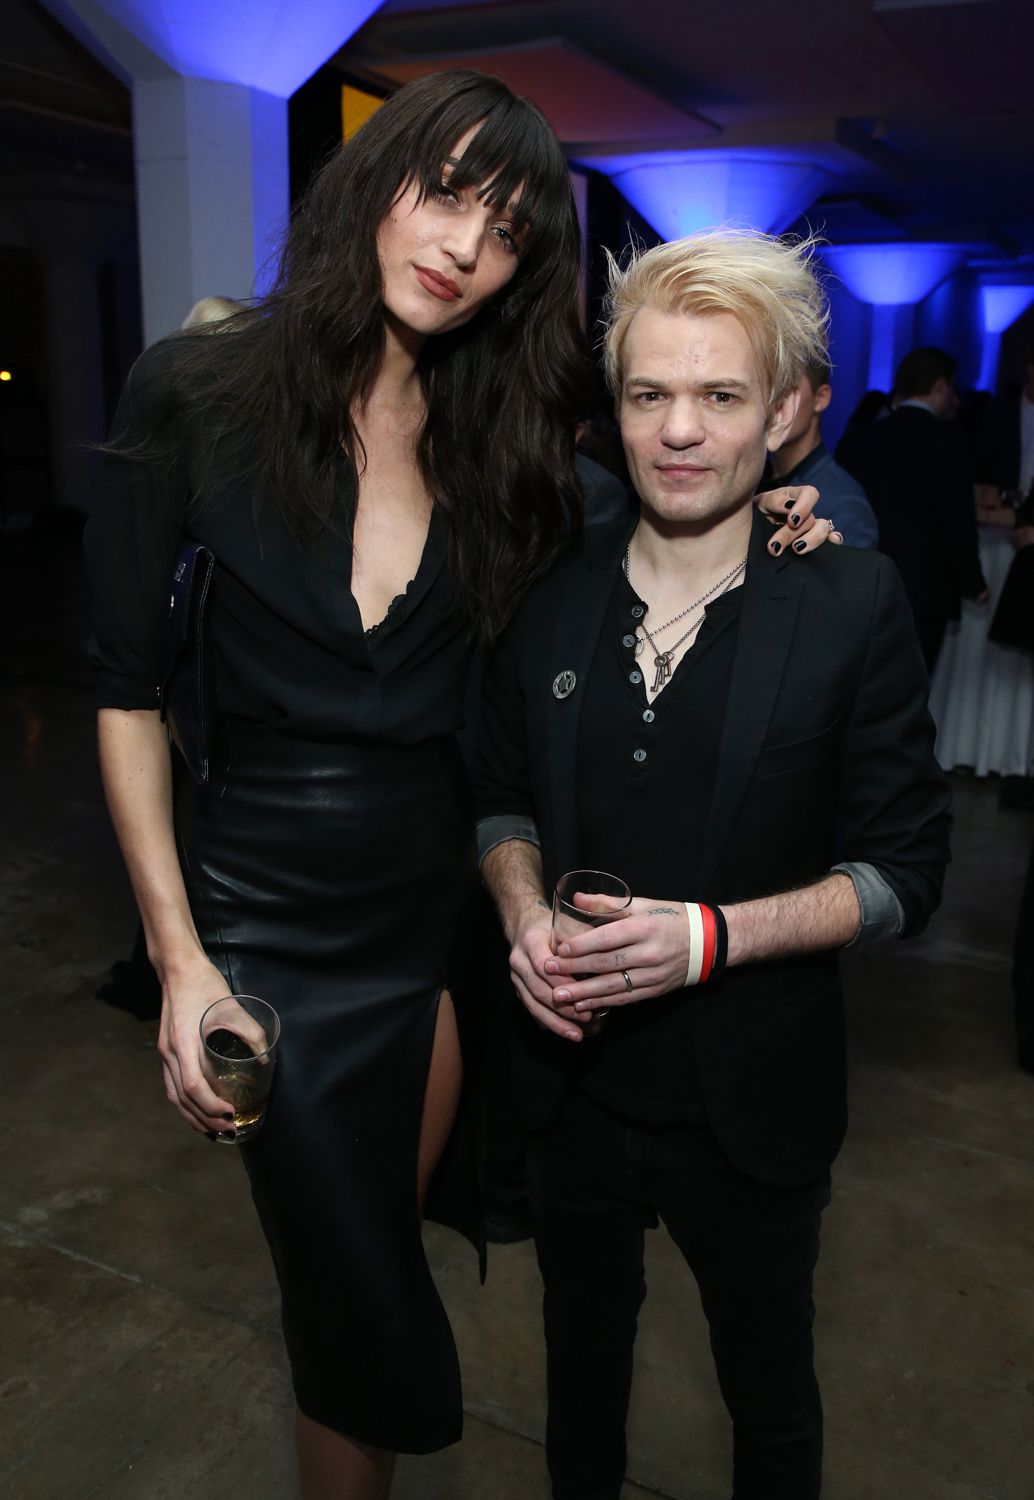 Ariana Cooper and Deryck Whibley attend the 3rd annual Kodak Awards at Hudson Loft on February 15, 2019 in Los Angeles, California.